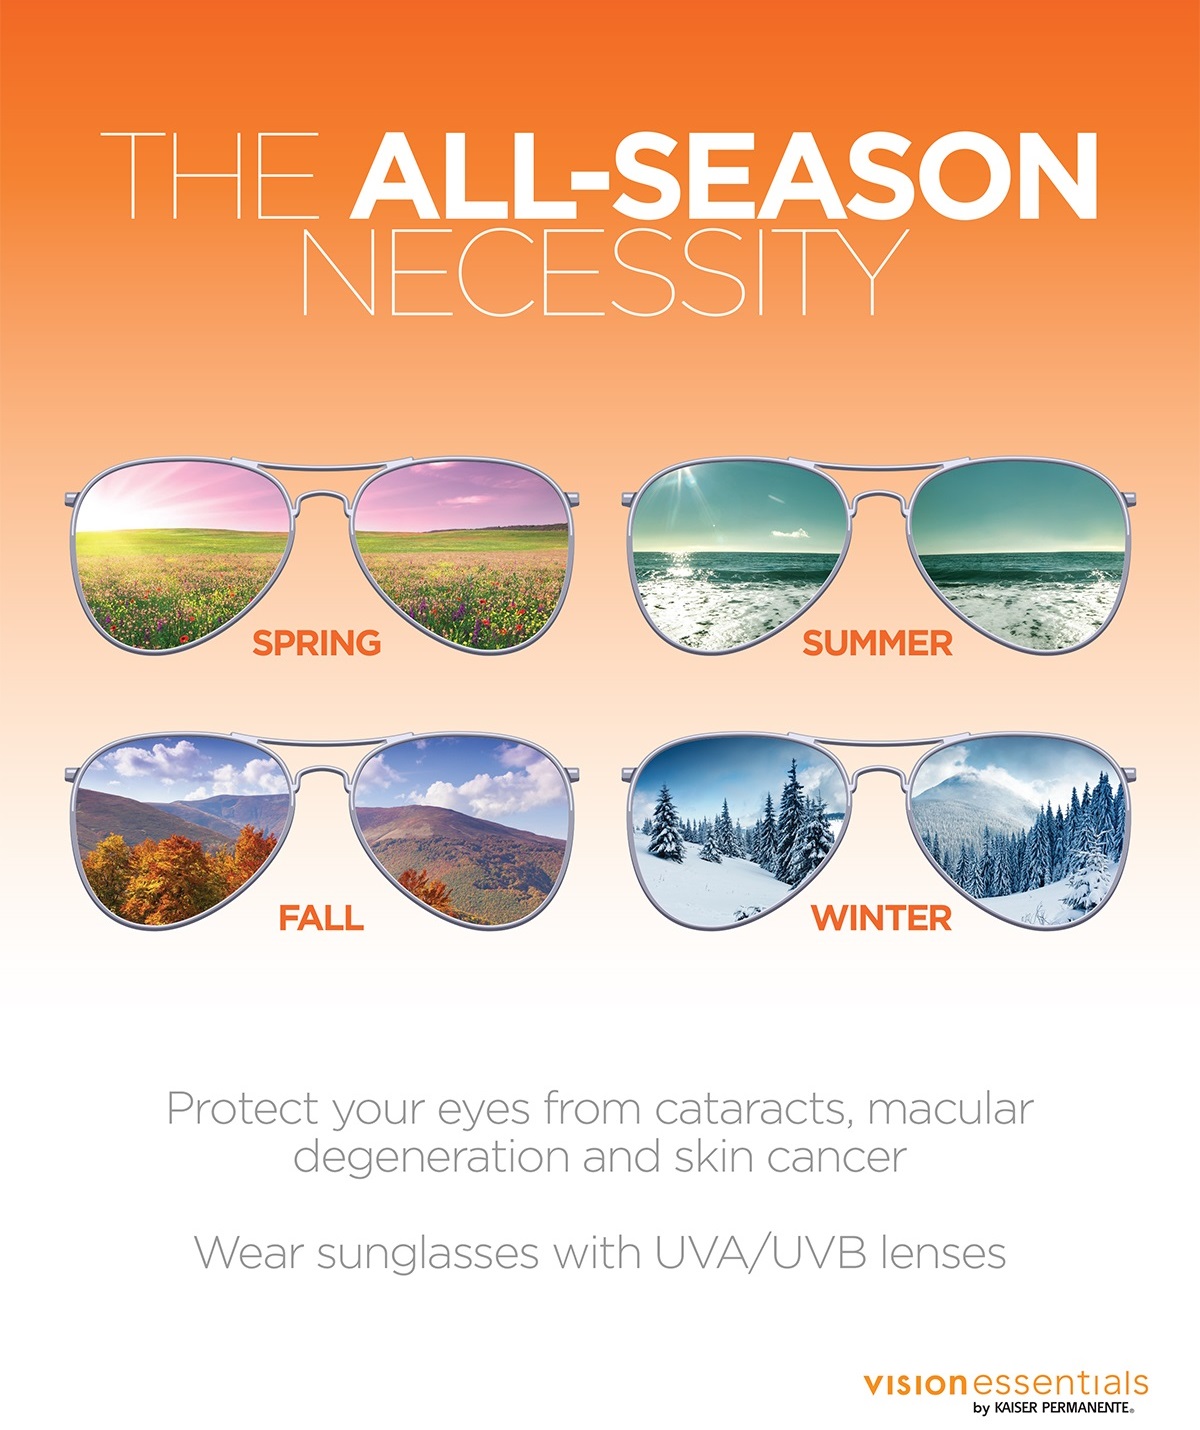 Wear sunglasses with UVA/UVB lenses to protect your eyes from cataracts, macular degeneration and skin cancer image